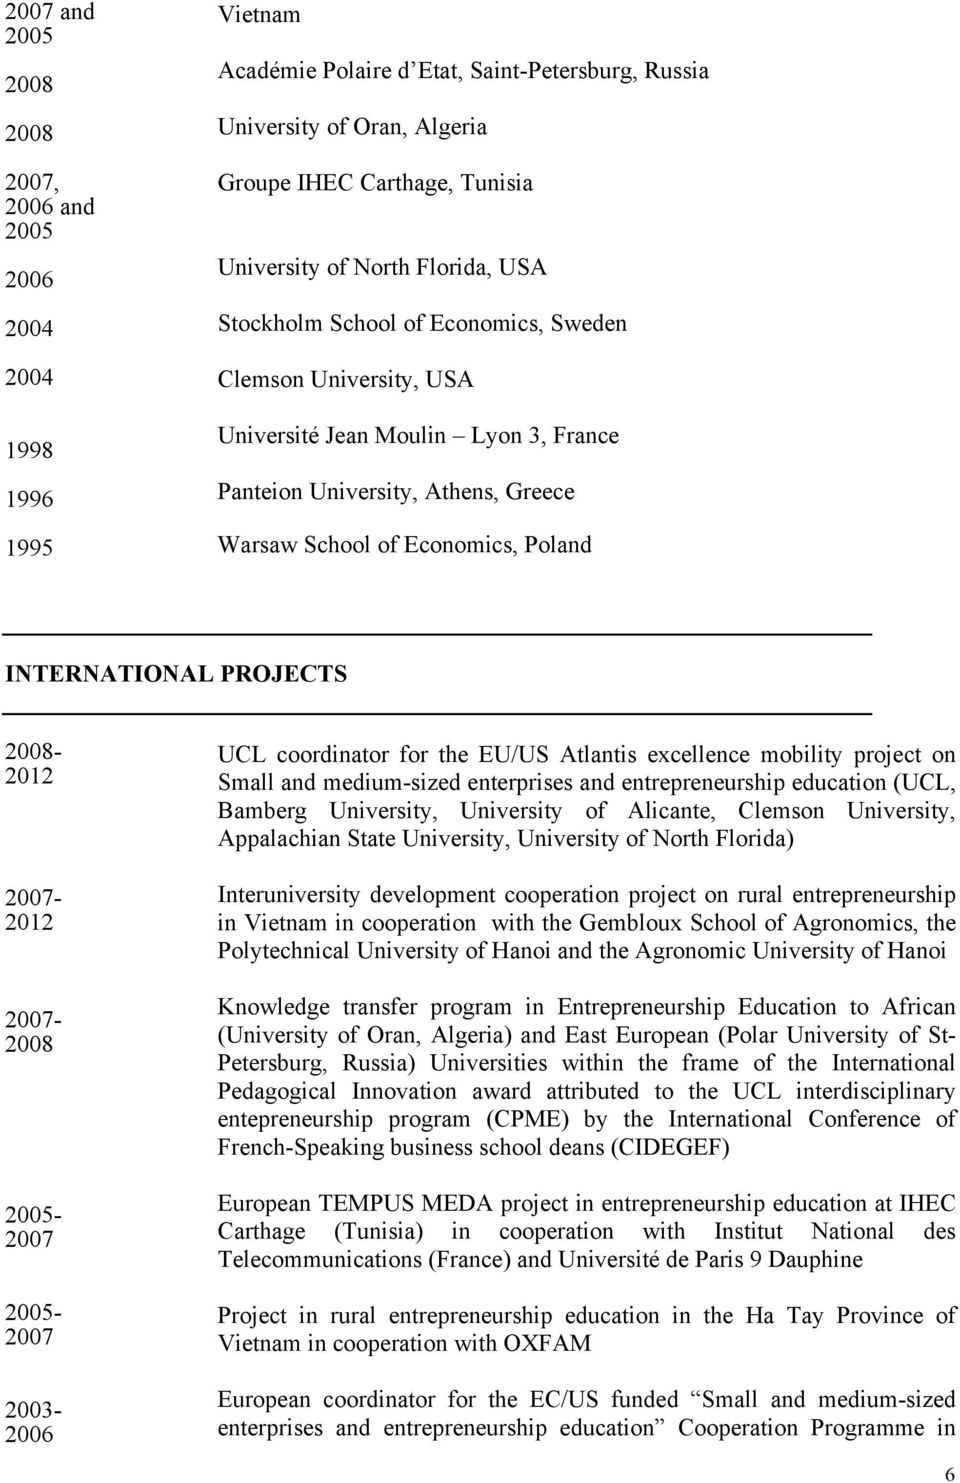 2007-2007- 2005-2007 2005-2007 2003- UCL coordinator for the EU/US Atlantis excellence mobility project on Small and medium-sized enterprises and entrepreneurship education (UCL, Bamberg University,